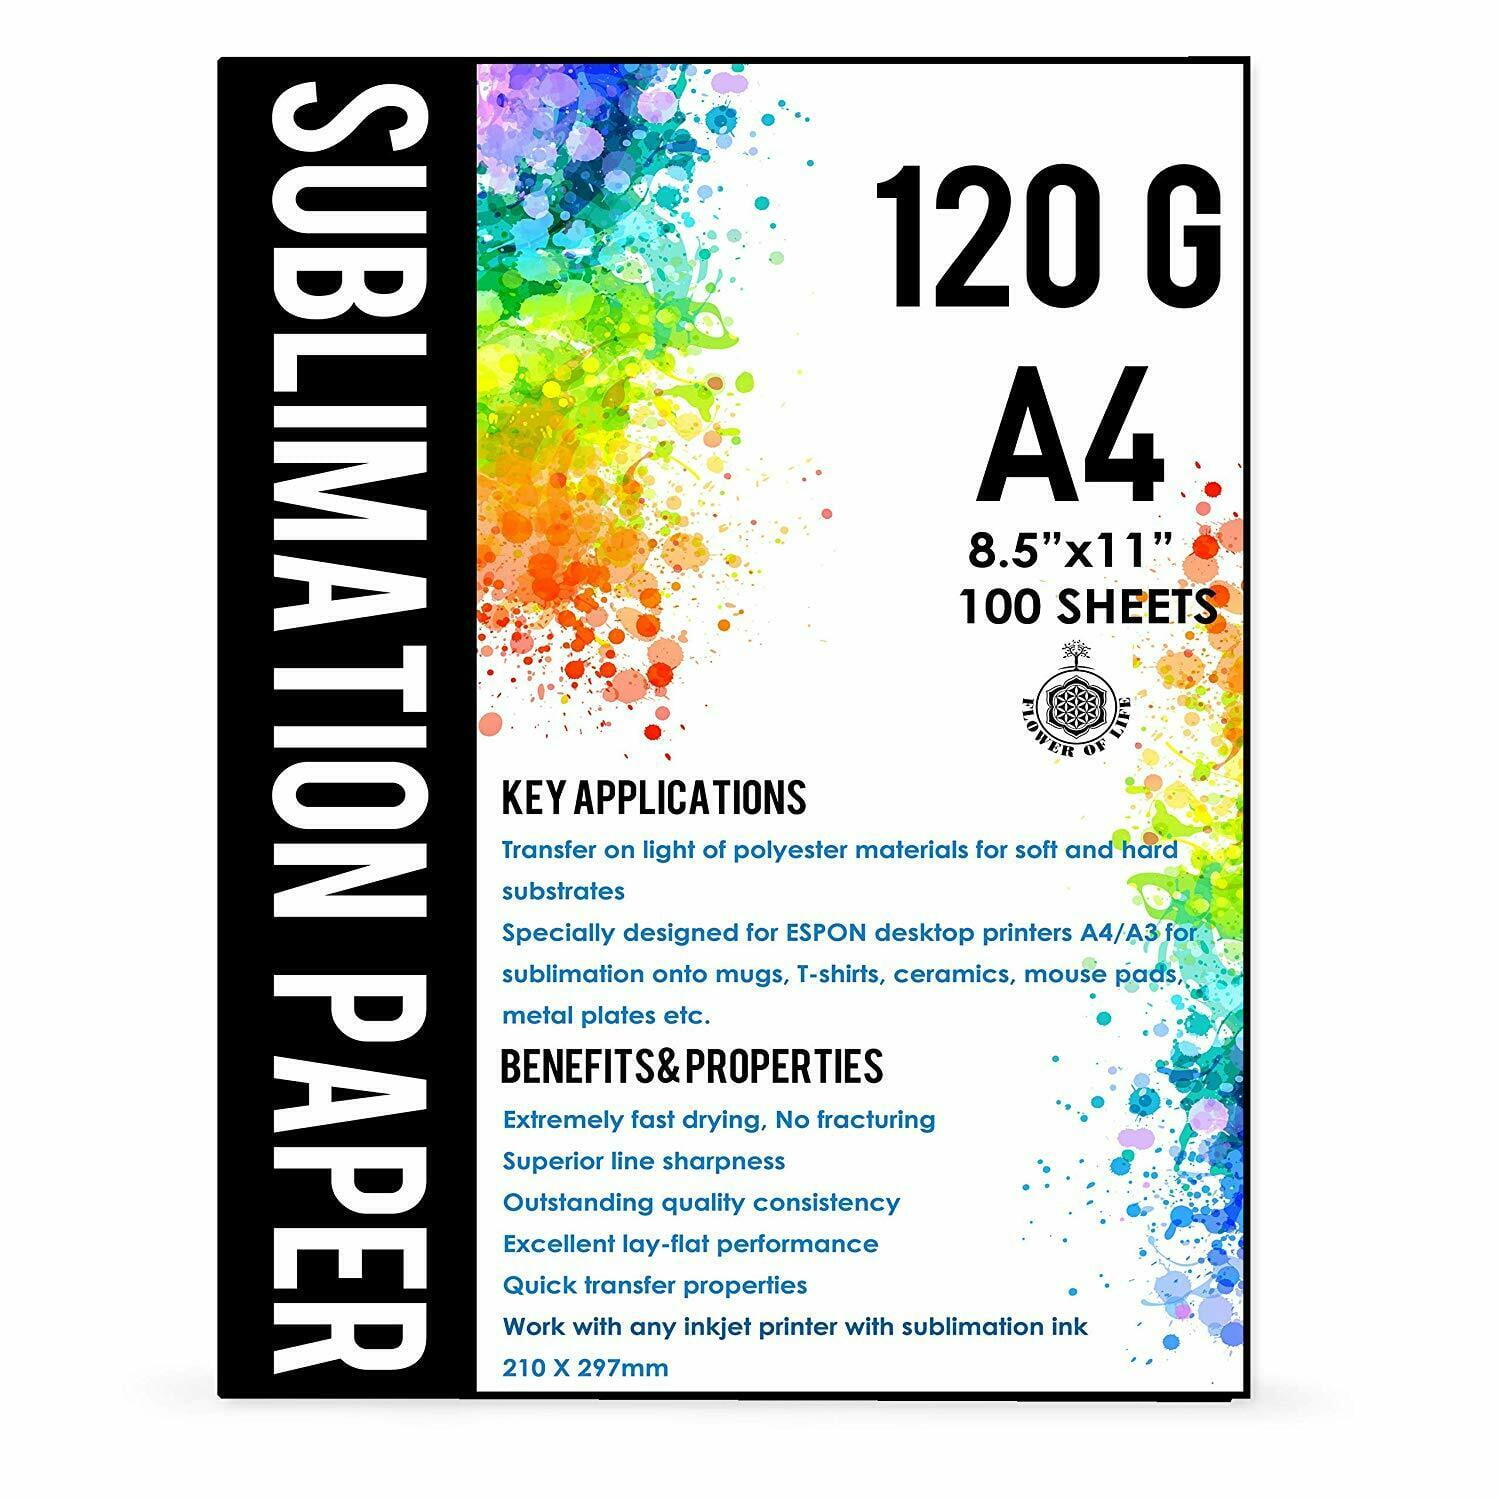 Dye Sublimation Transfer Paper for Virtuoso and Epson 200 sheets 8.5x11 per pack 